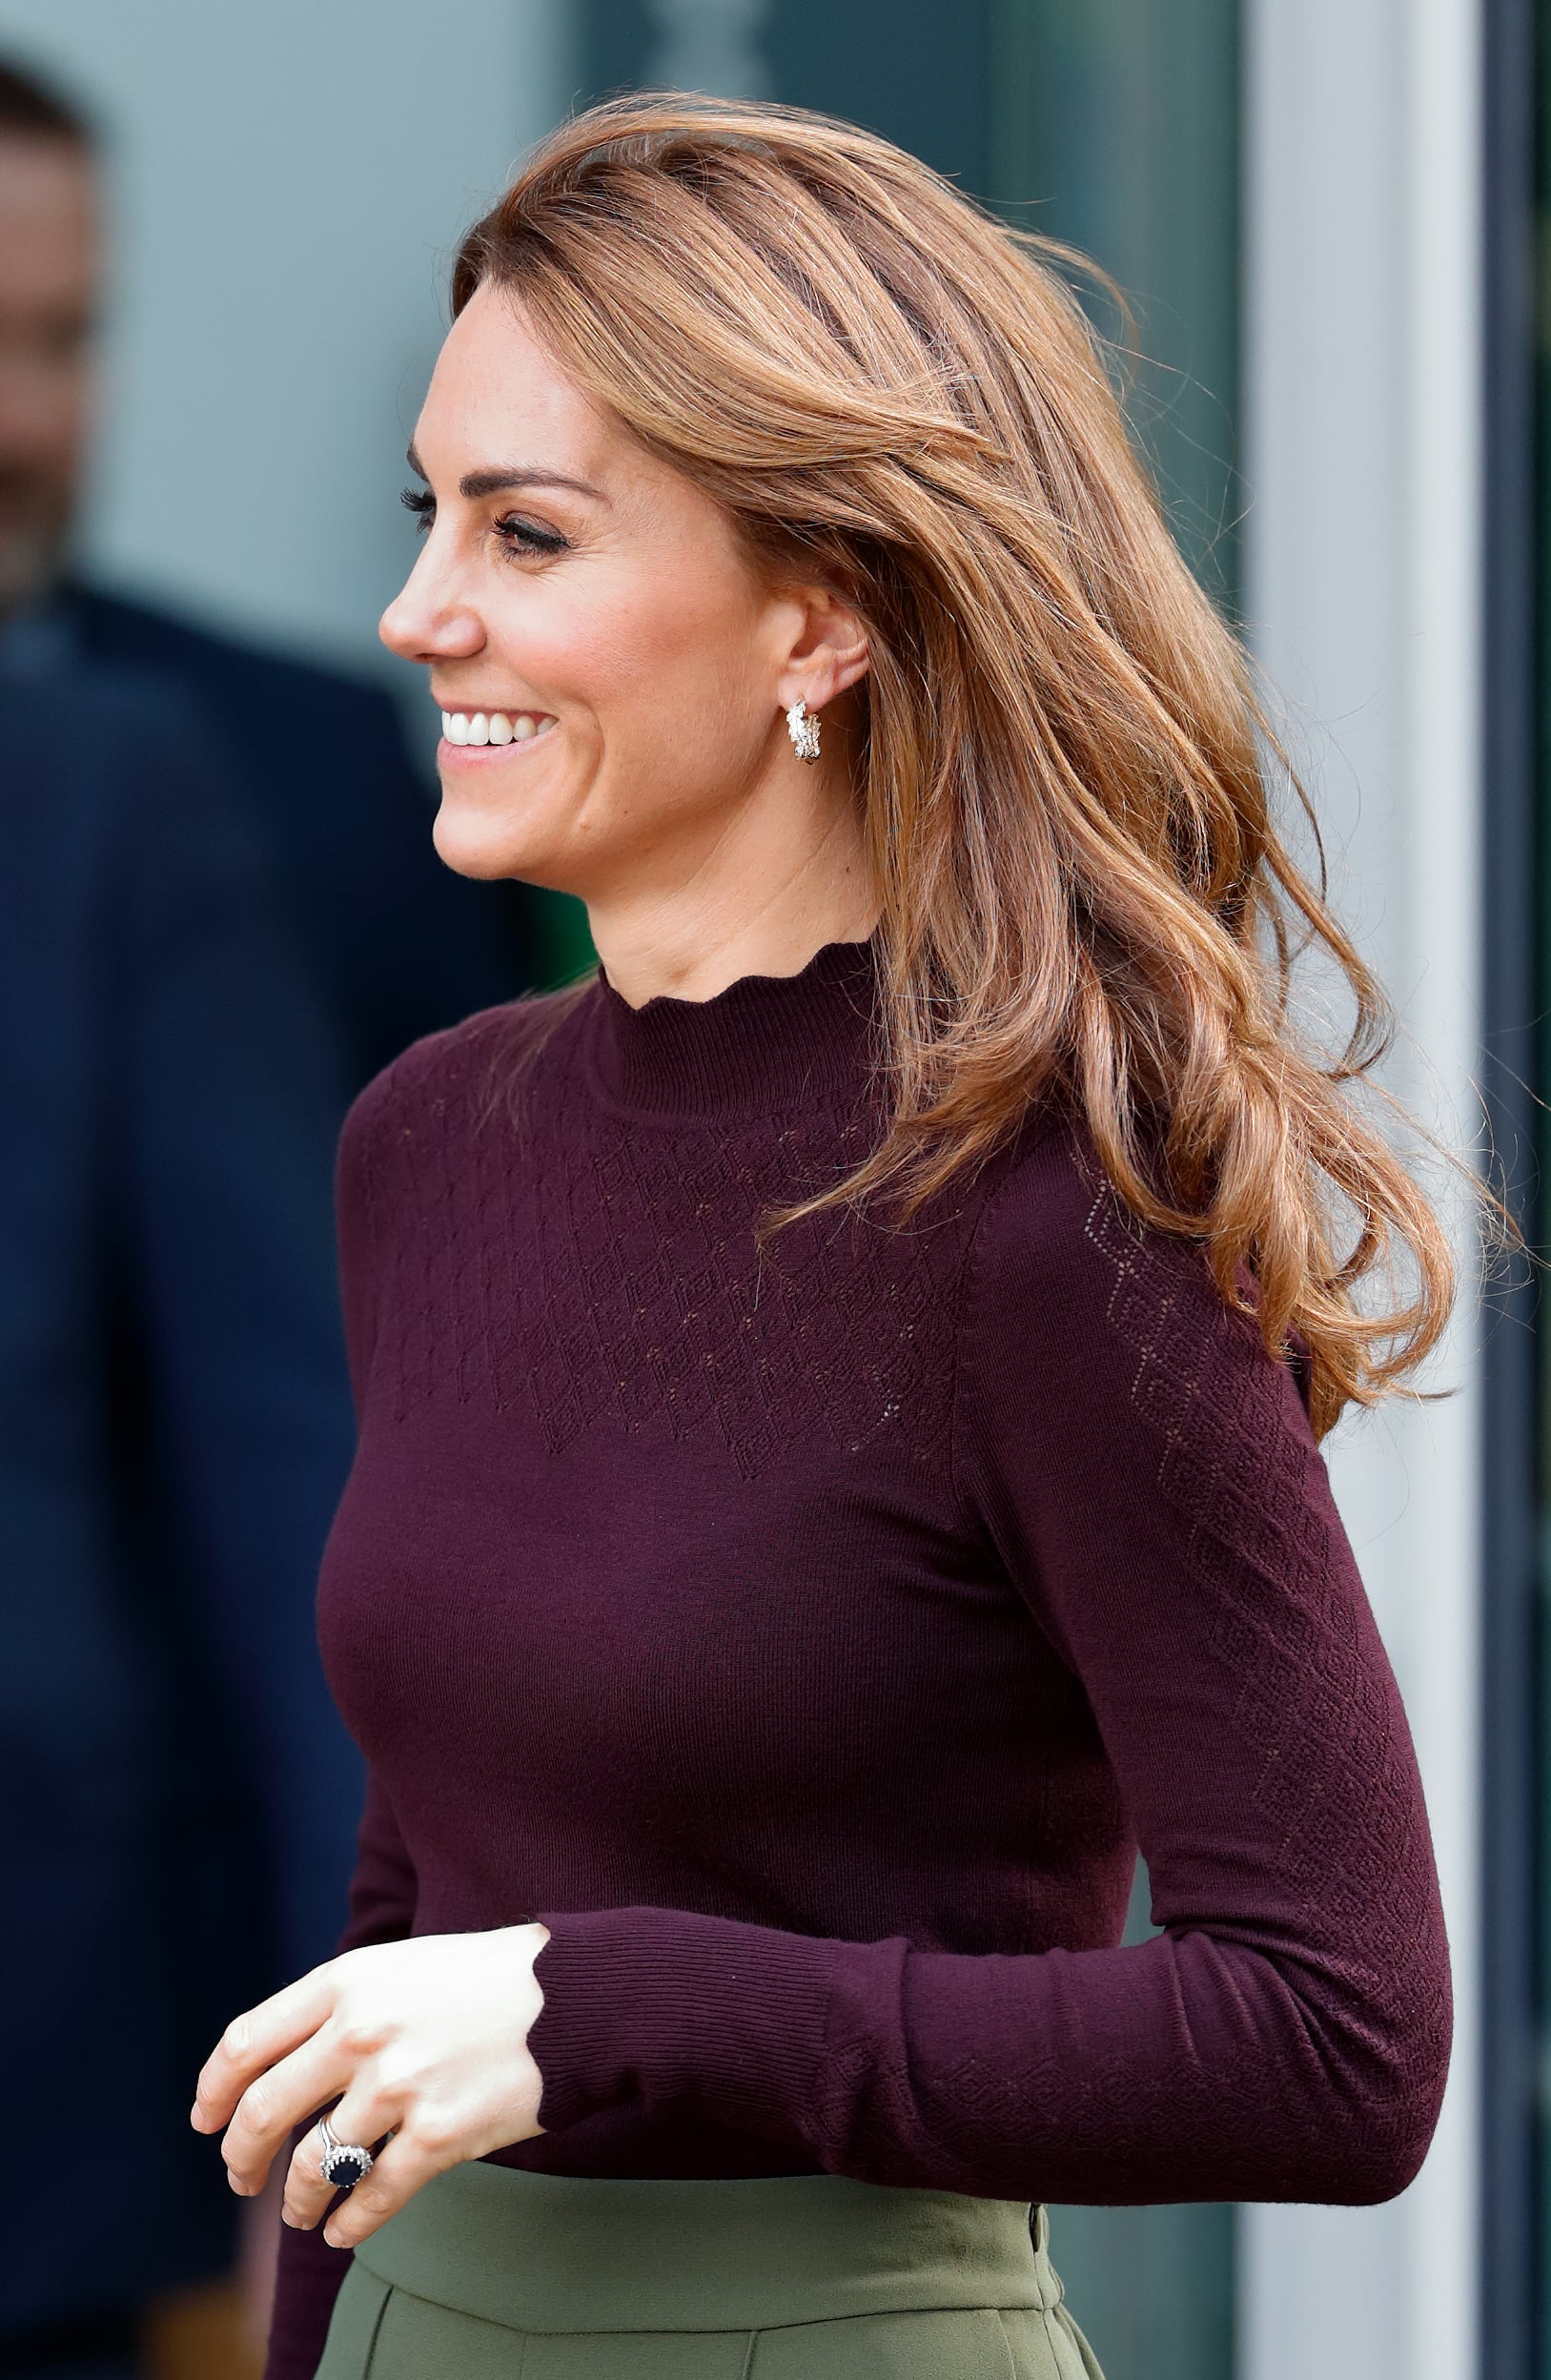 All the Best Photos of Kate Middleton's Hair Over Her Years as a